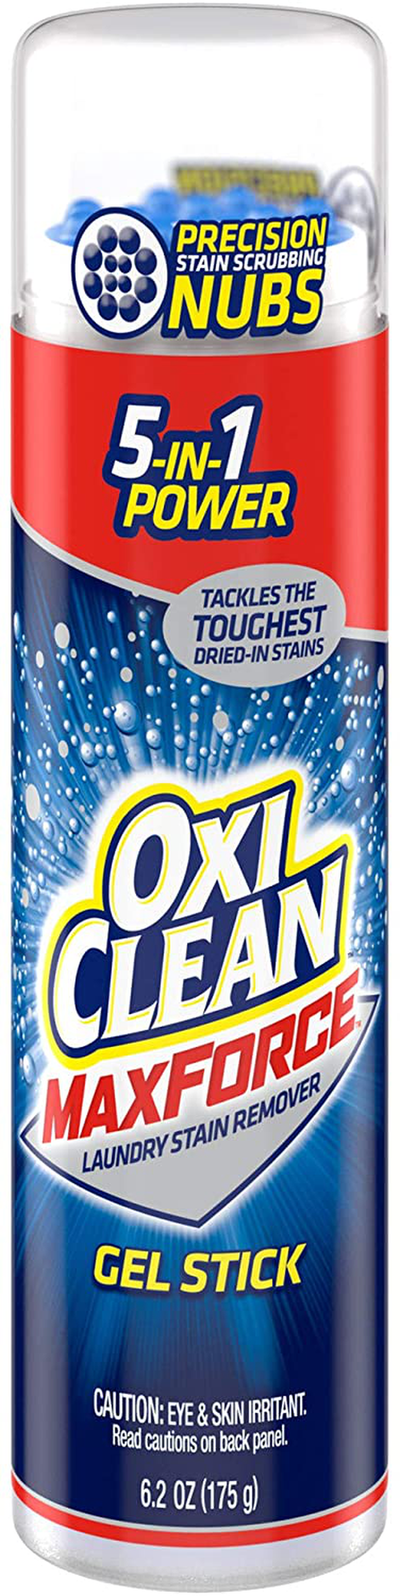 OxiClean Max Force Gel Stain Remover Stick, 6.2 Oz, Pack of 2